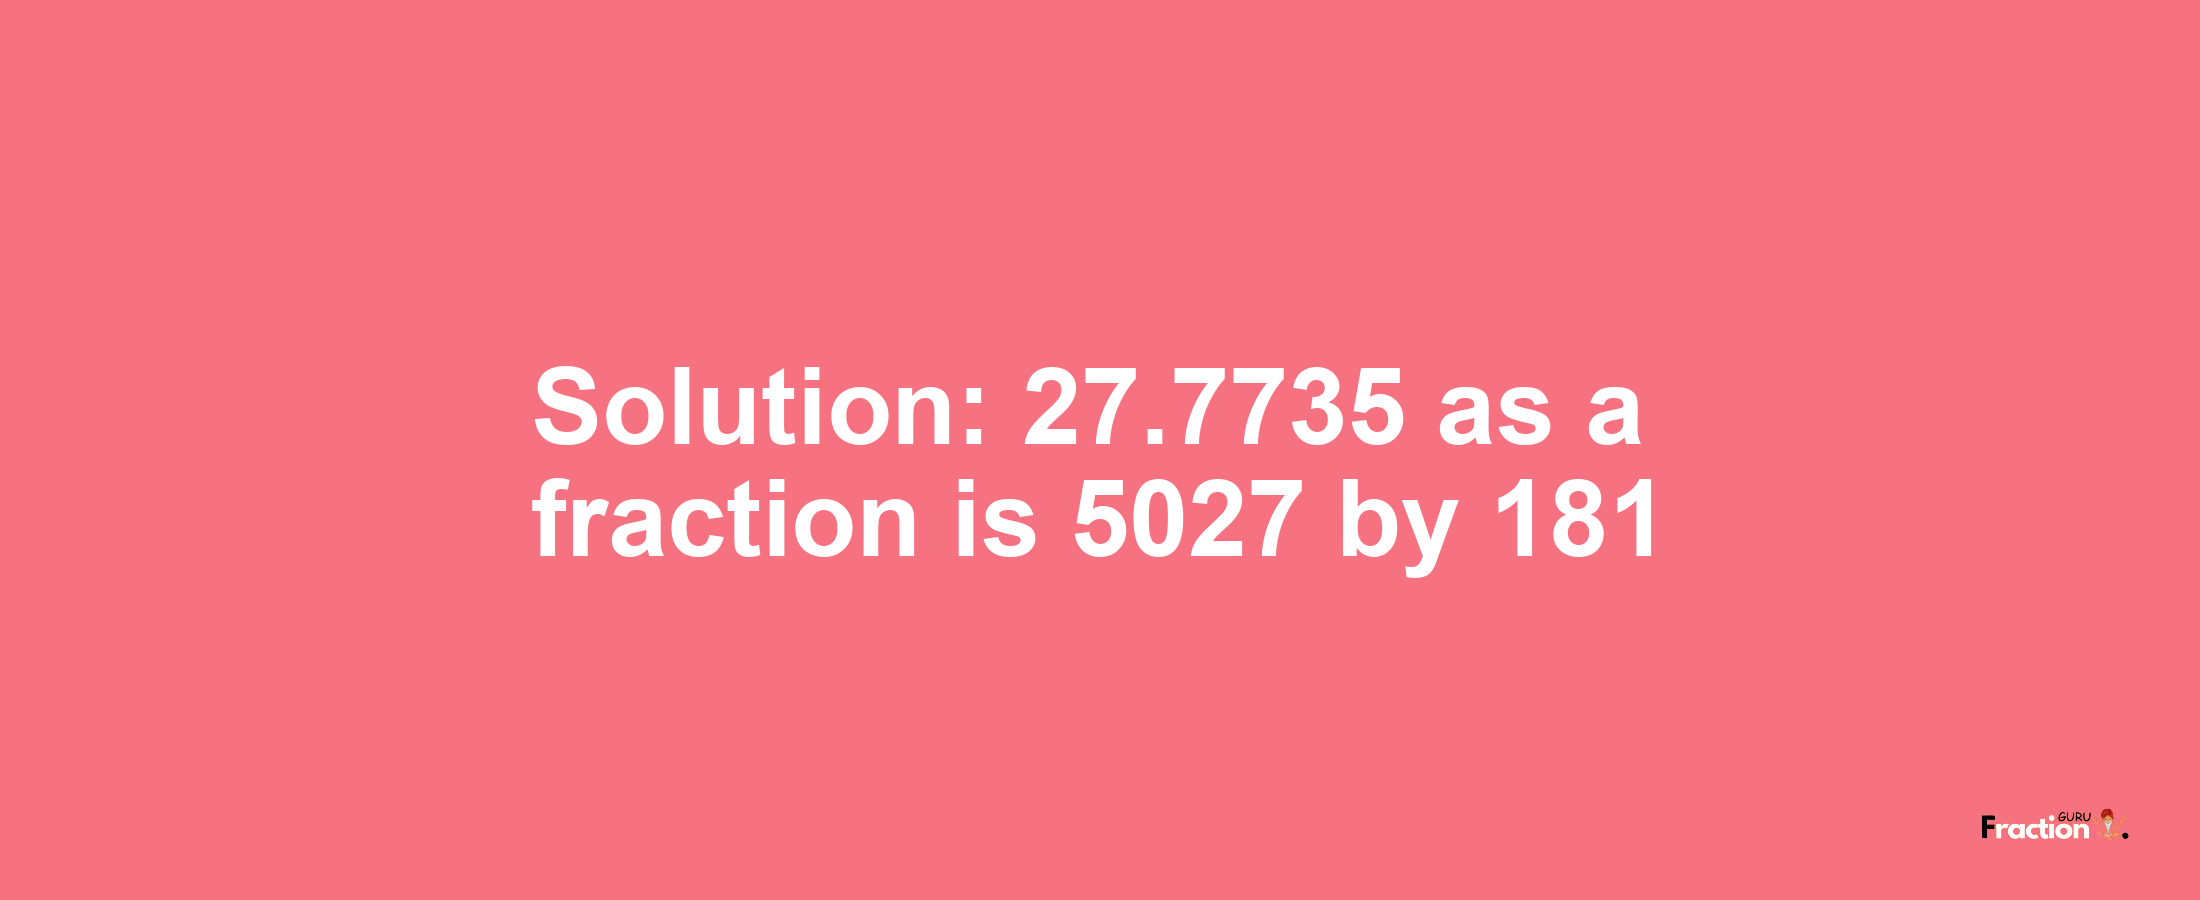 Solution:27.7735 as a fraction is 5027/181